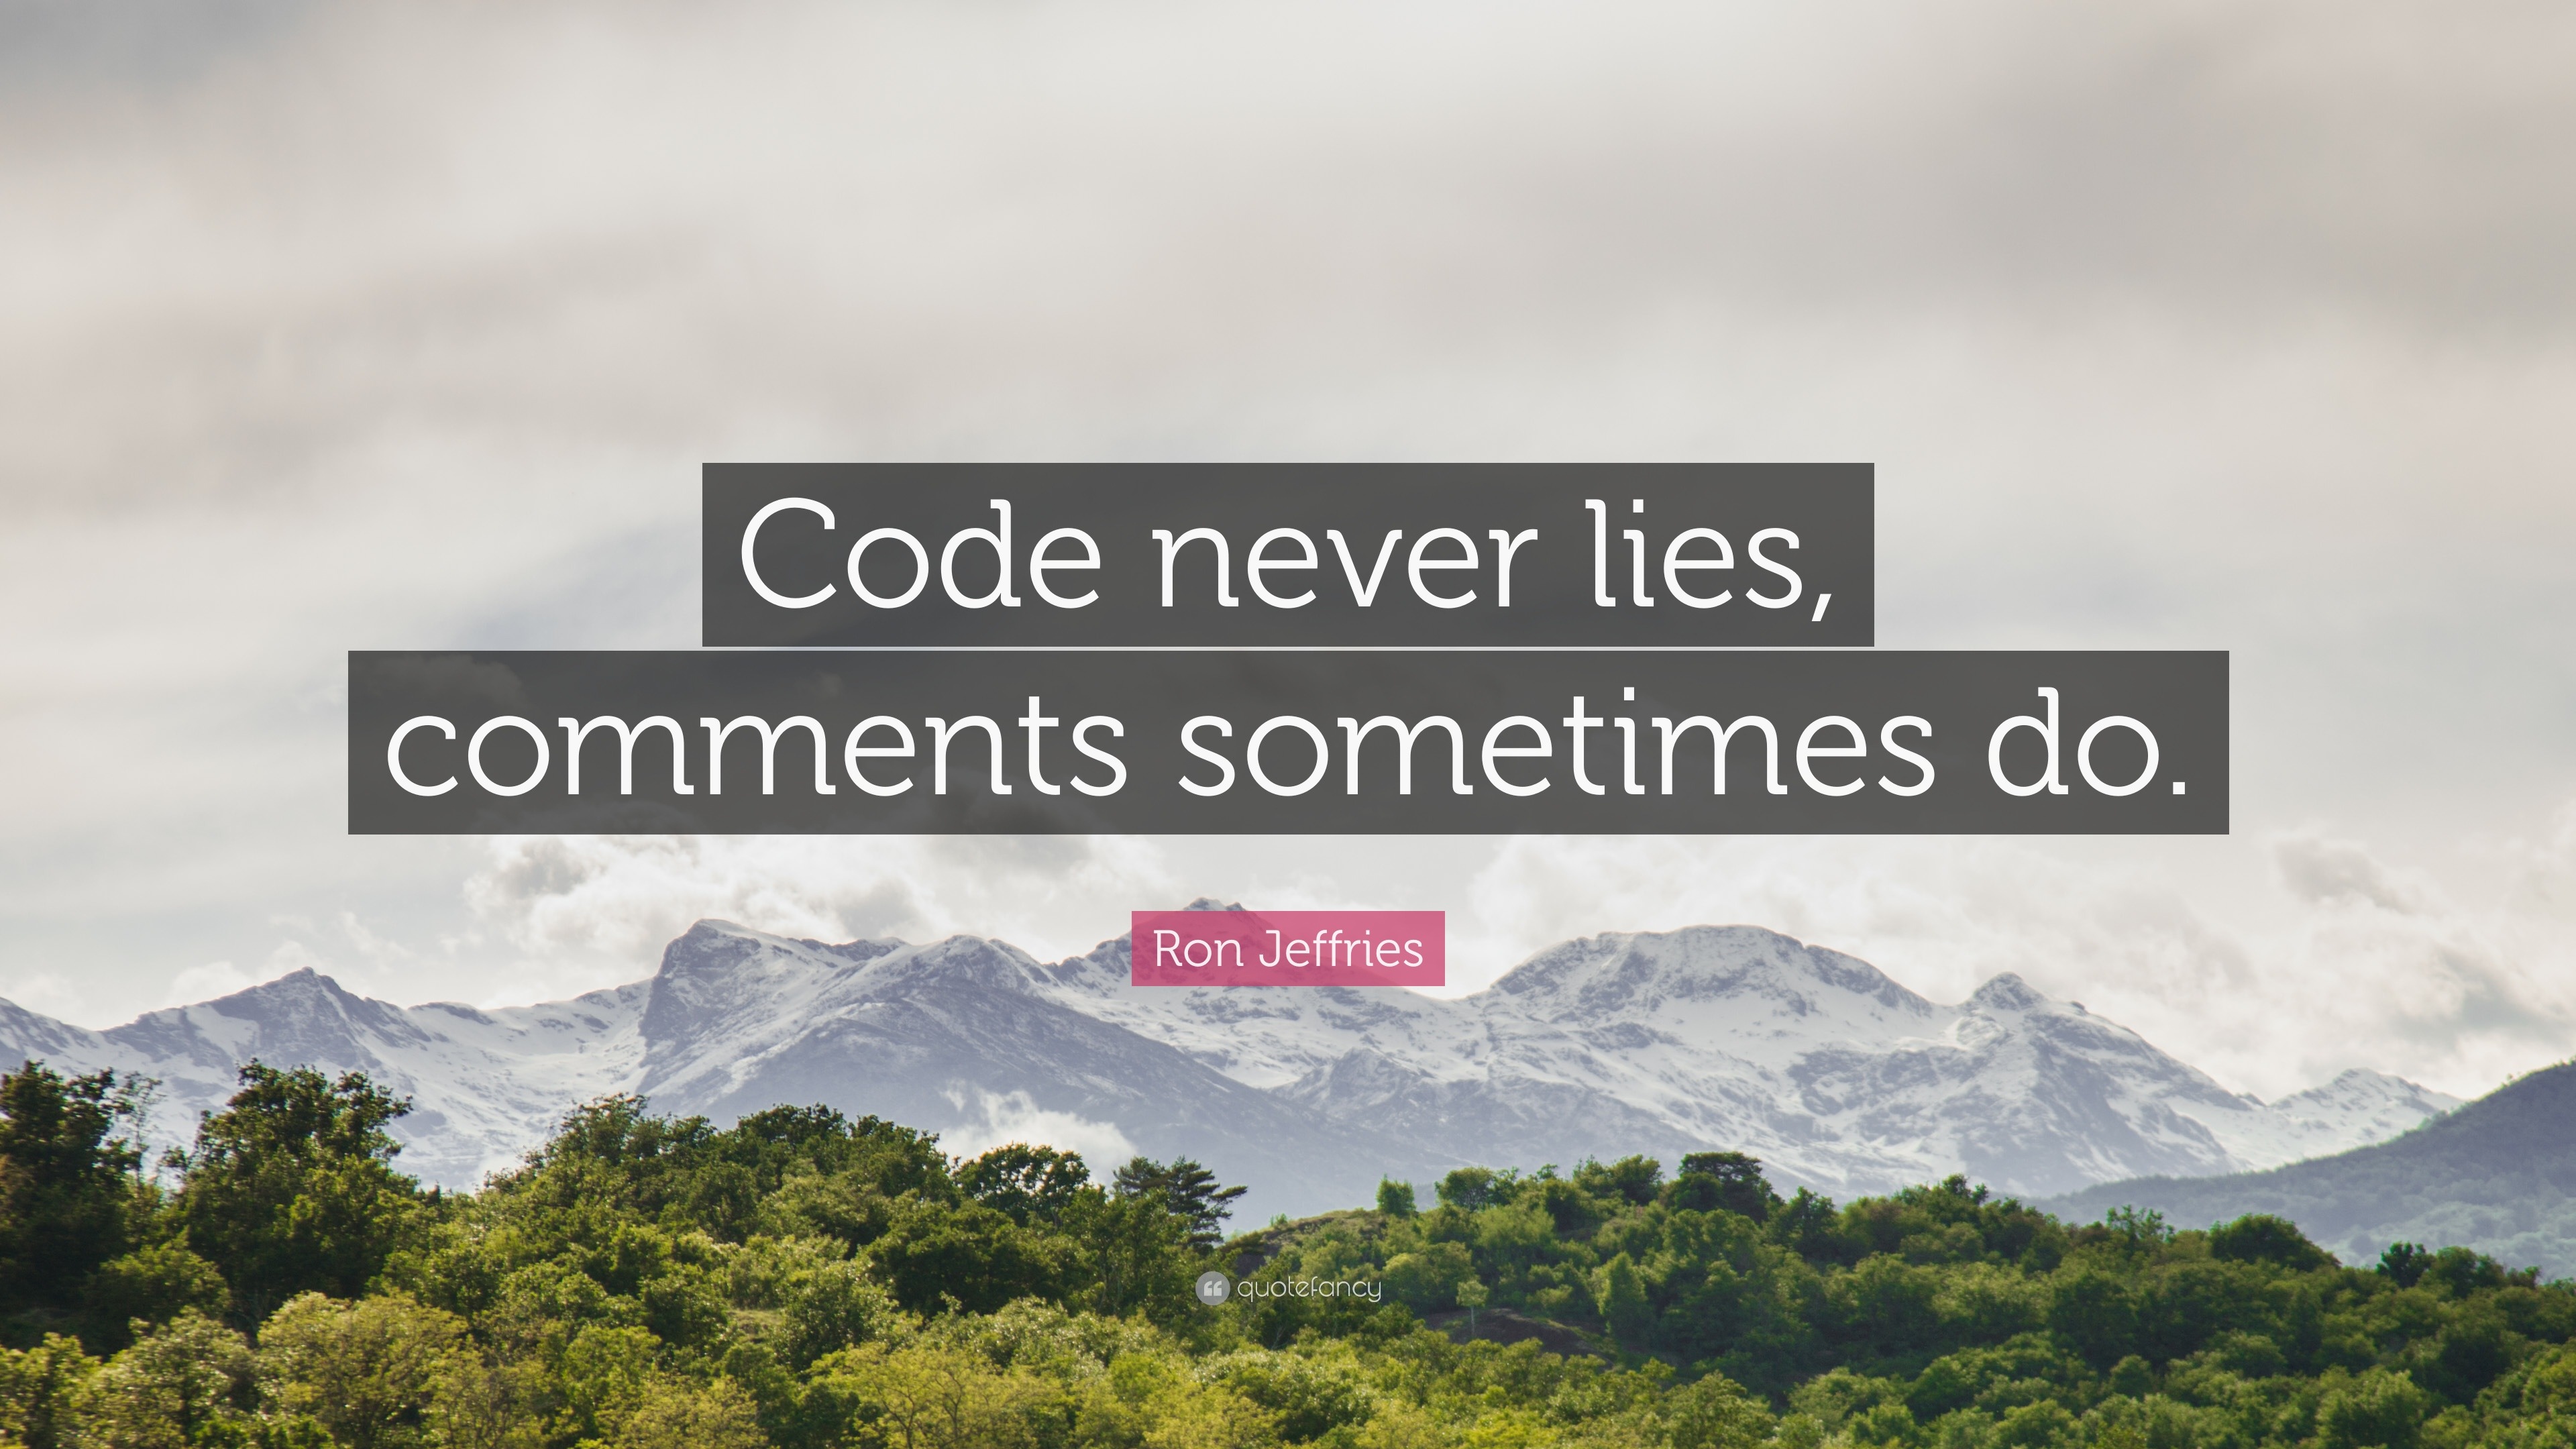 Download Hello World Coding Quote Wallpaper | Wallpapers.com